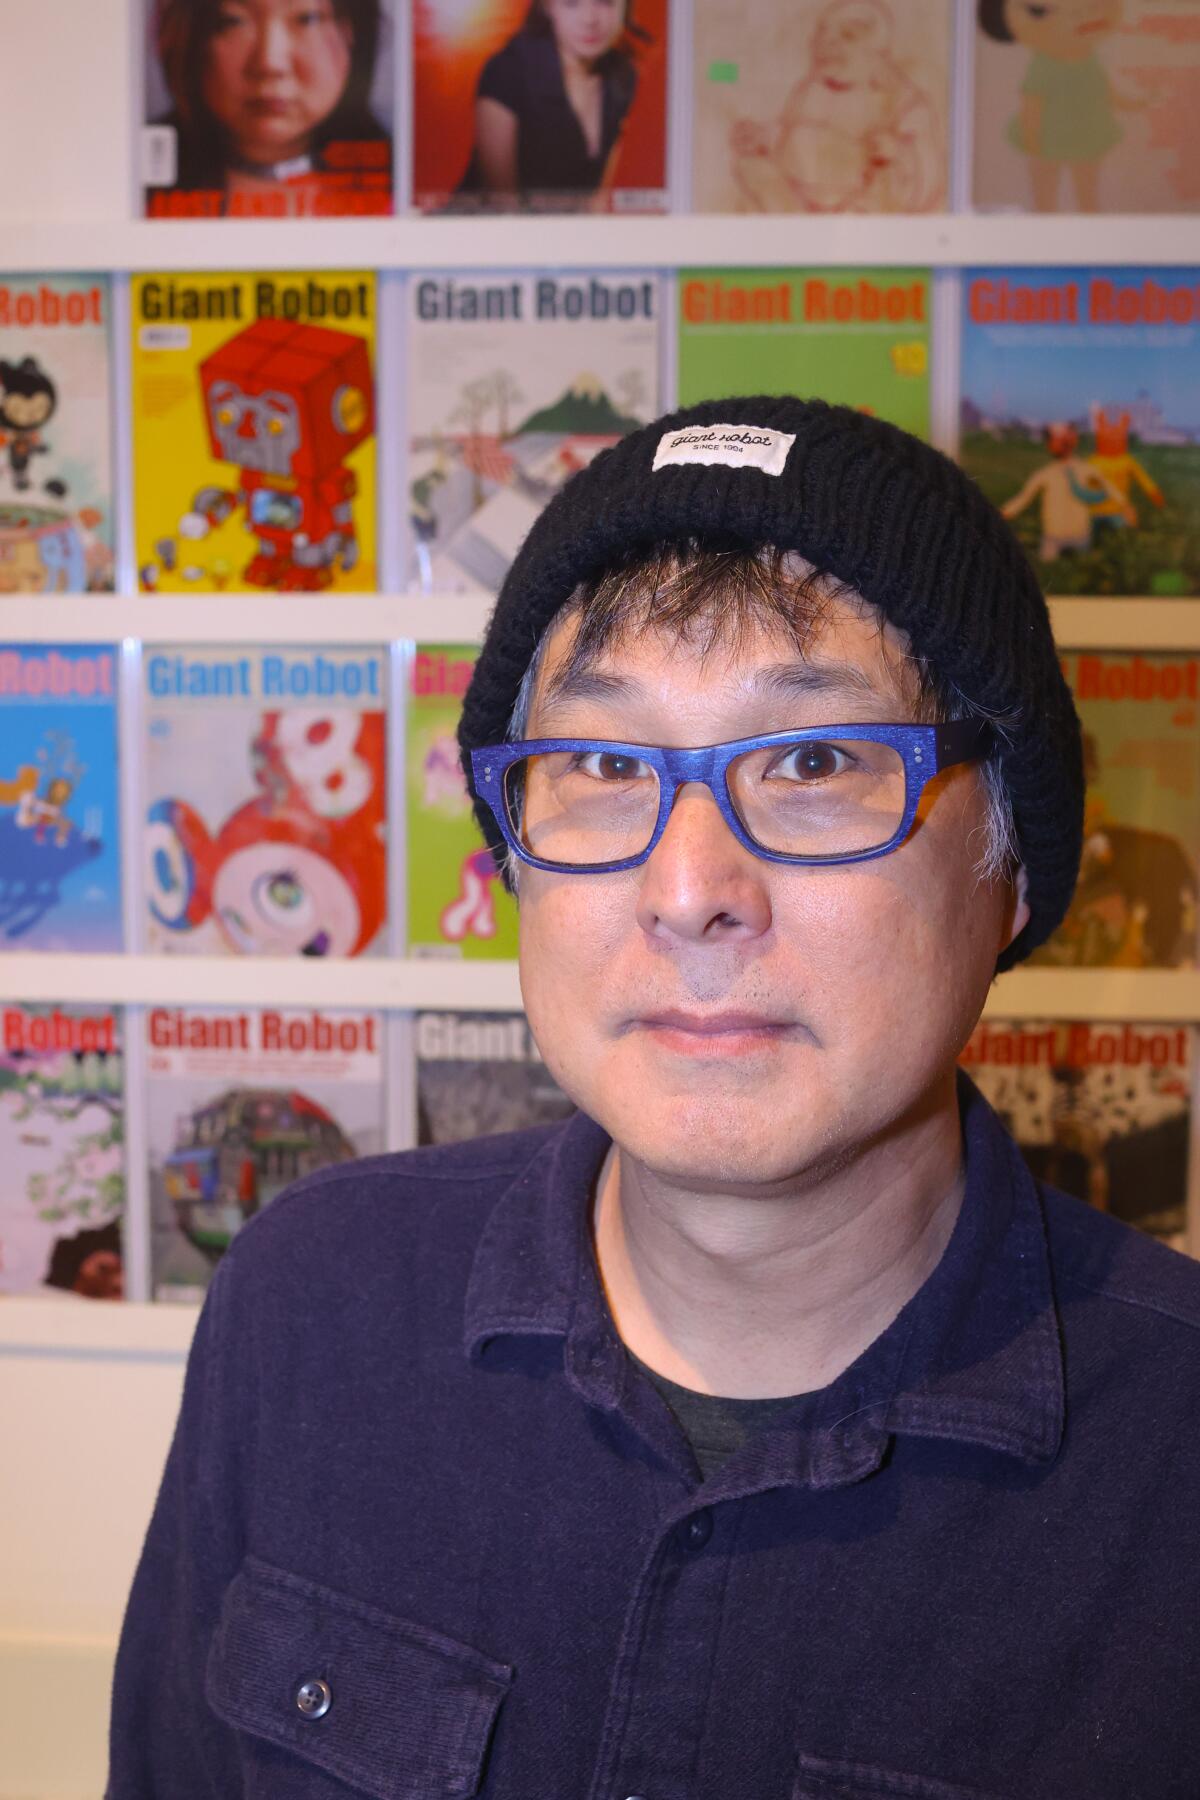 A man wearing glasses and a wool hat stands in front of a display of magazine covers.